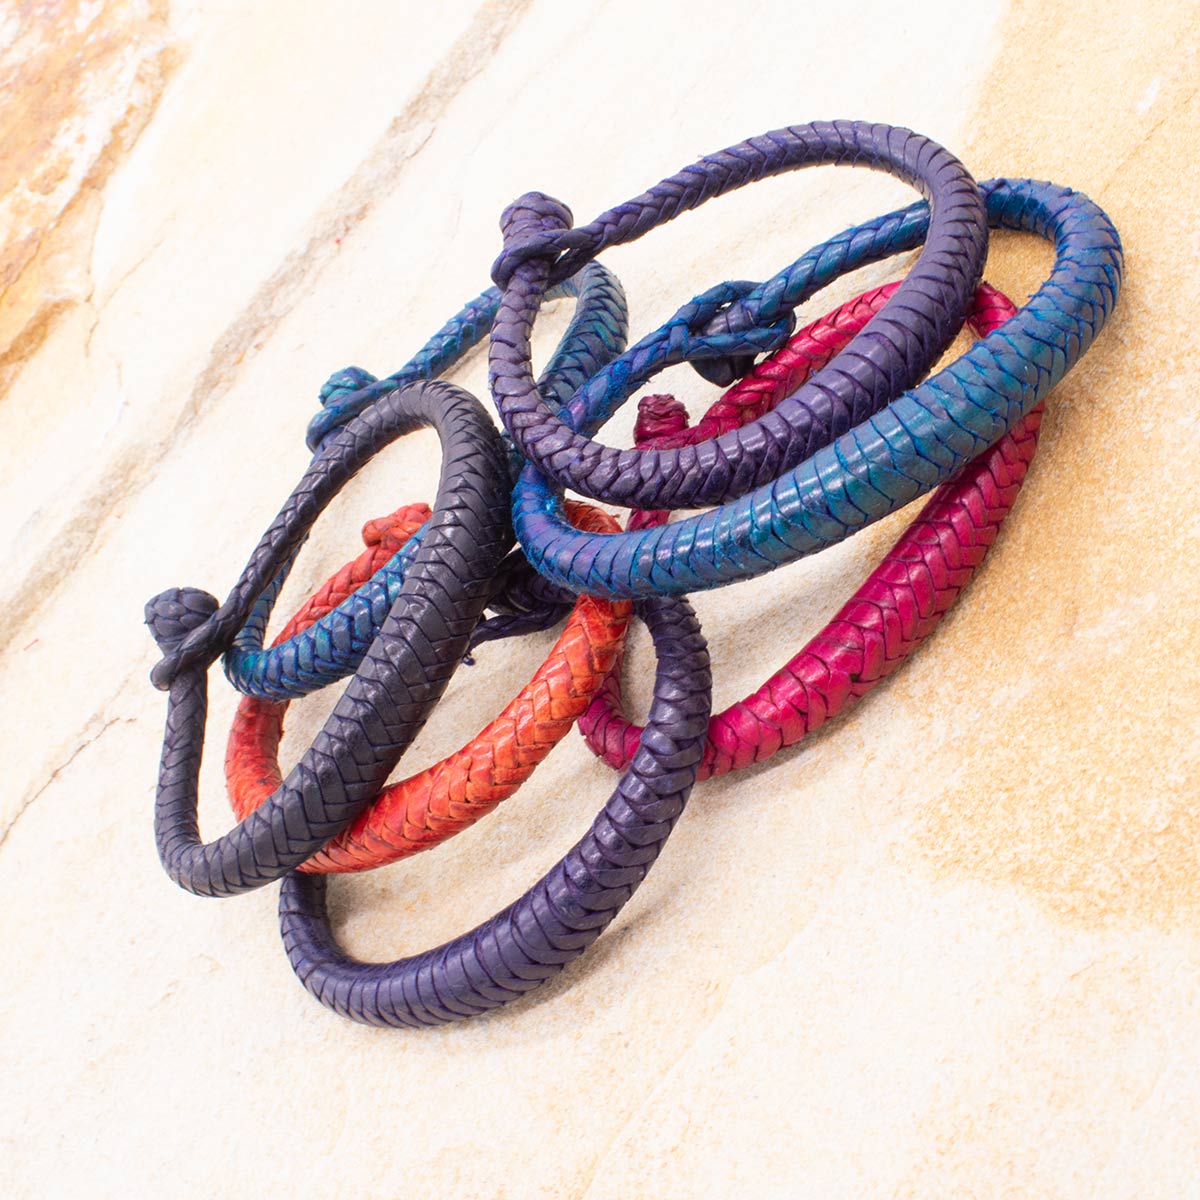 Multi-bracelet, thin black synthetic leather strip, colourful laces